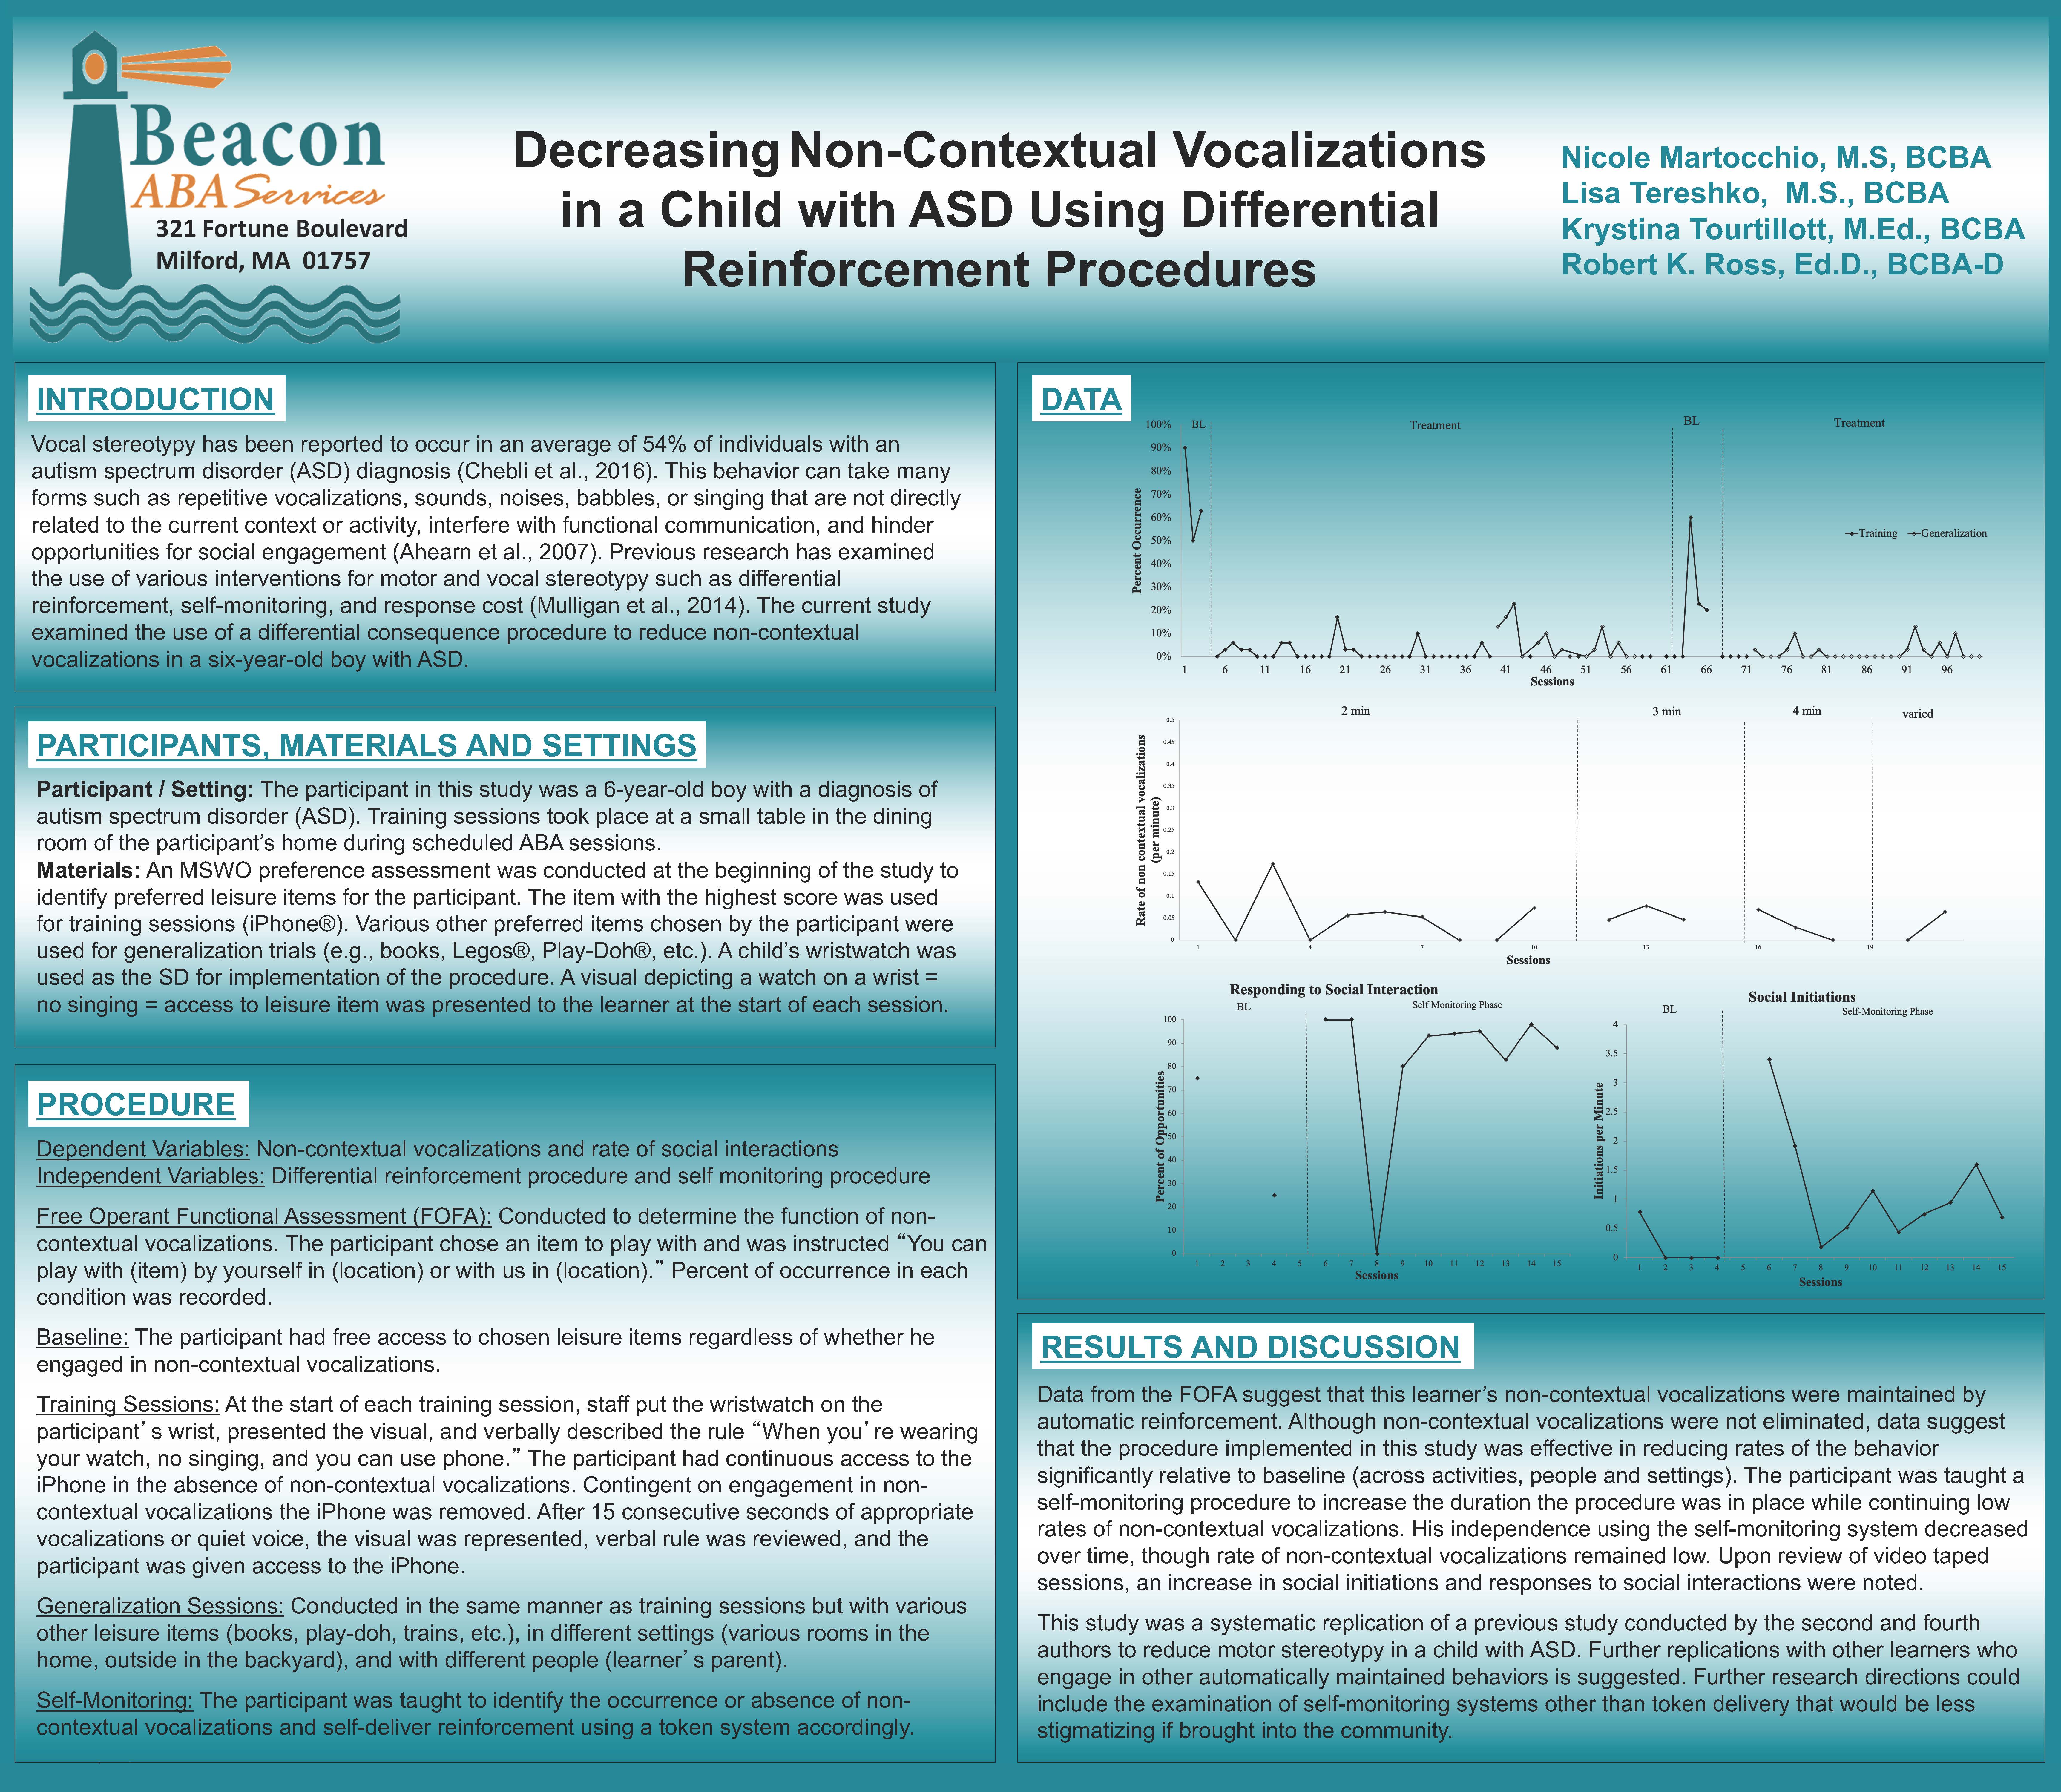 2019 ABAI Presentation: “Decreasing Non-Contextual Vocalizations in a Child with ASD Using Differential Reinforcement Procedures”